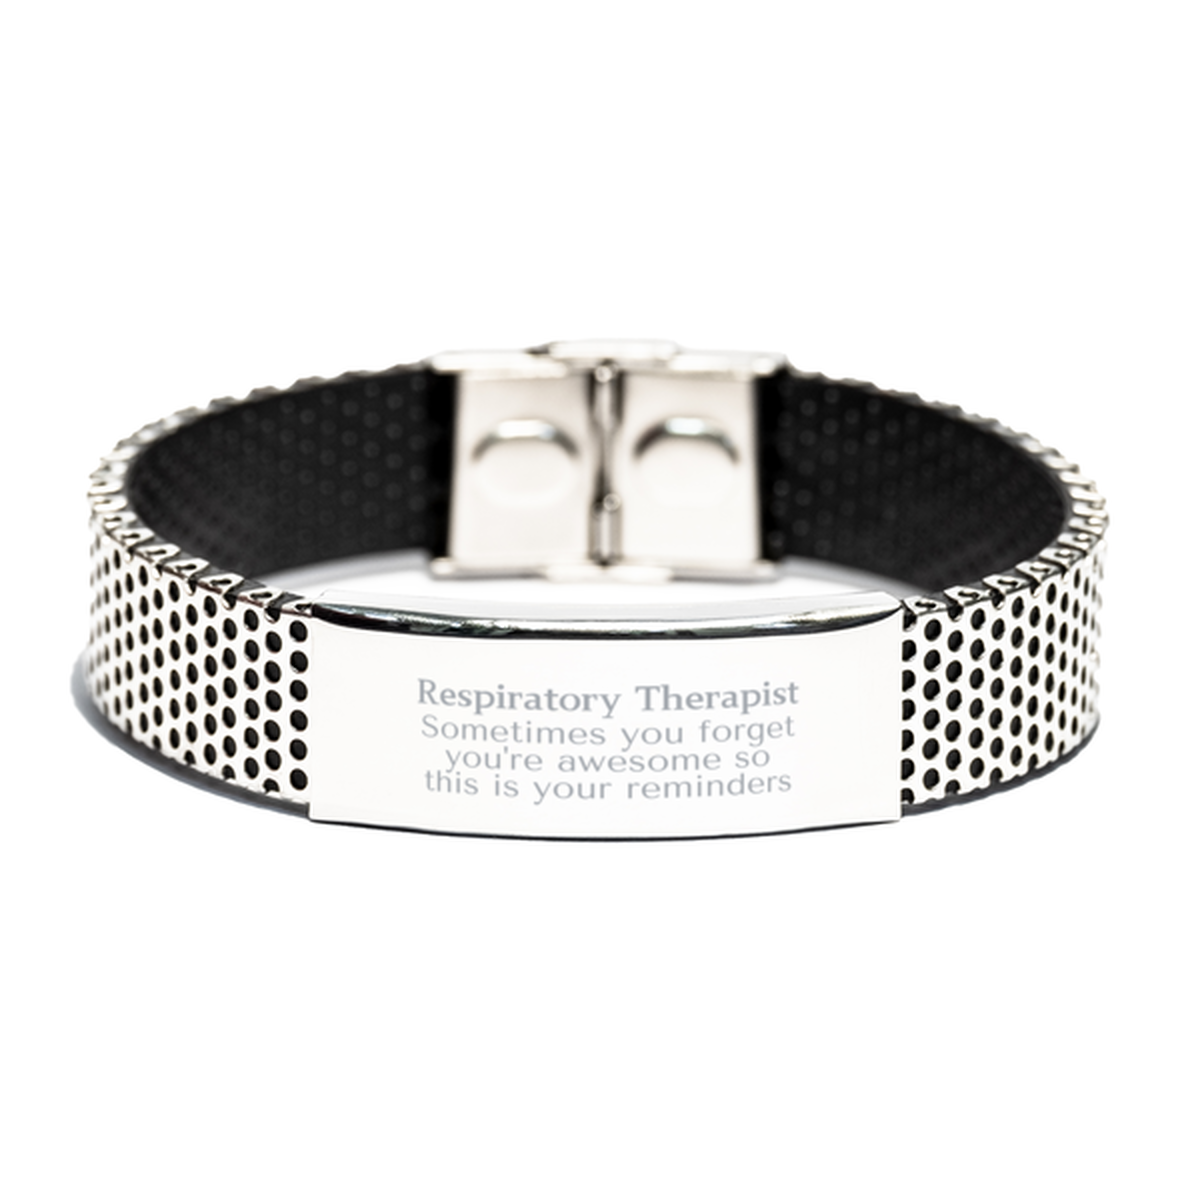 Sentimental Respiratory Therapist Stainless Steel Bracelet, Respiratory Therapist Sometimes you forget you're awesome so this is your reminders, Graduation Christmas Birthday Gifts for Respiratory Therapist, Men, Women, Coworkers